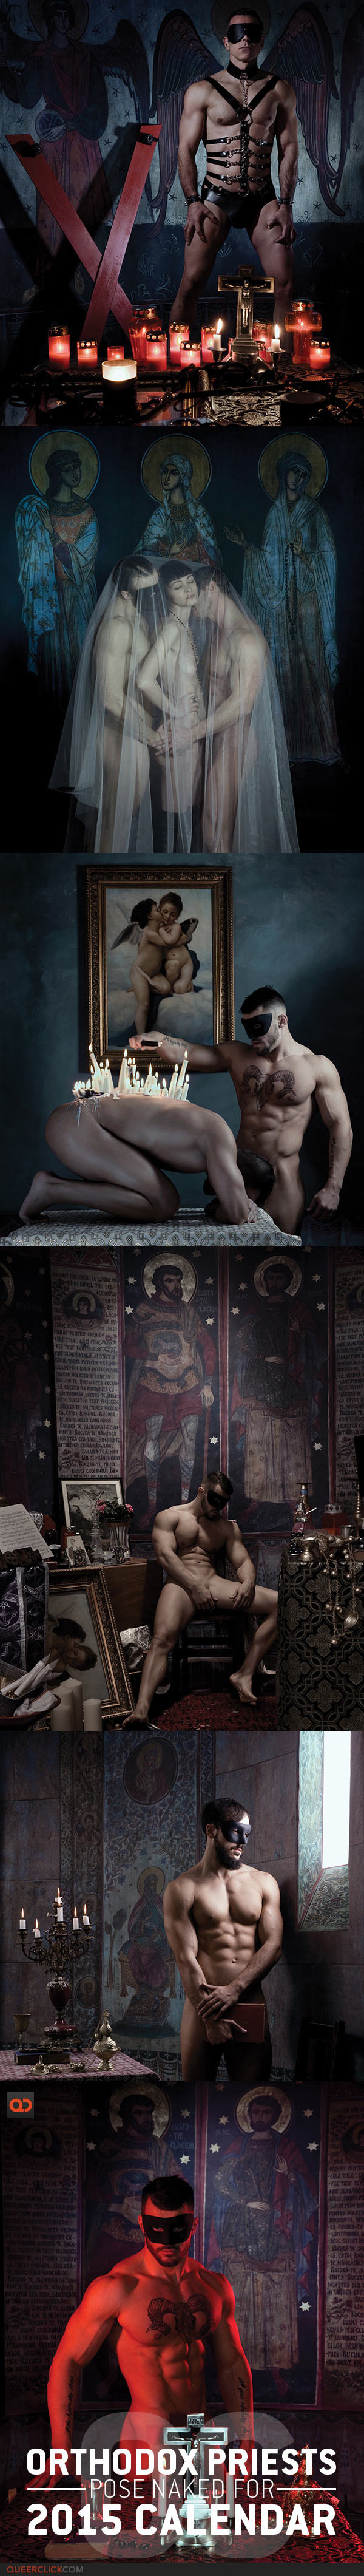 Orthodox Priests Pose Naked For 2015 Calendar